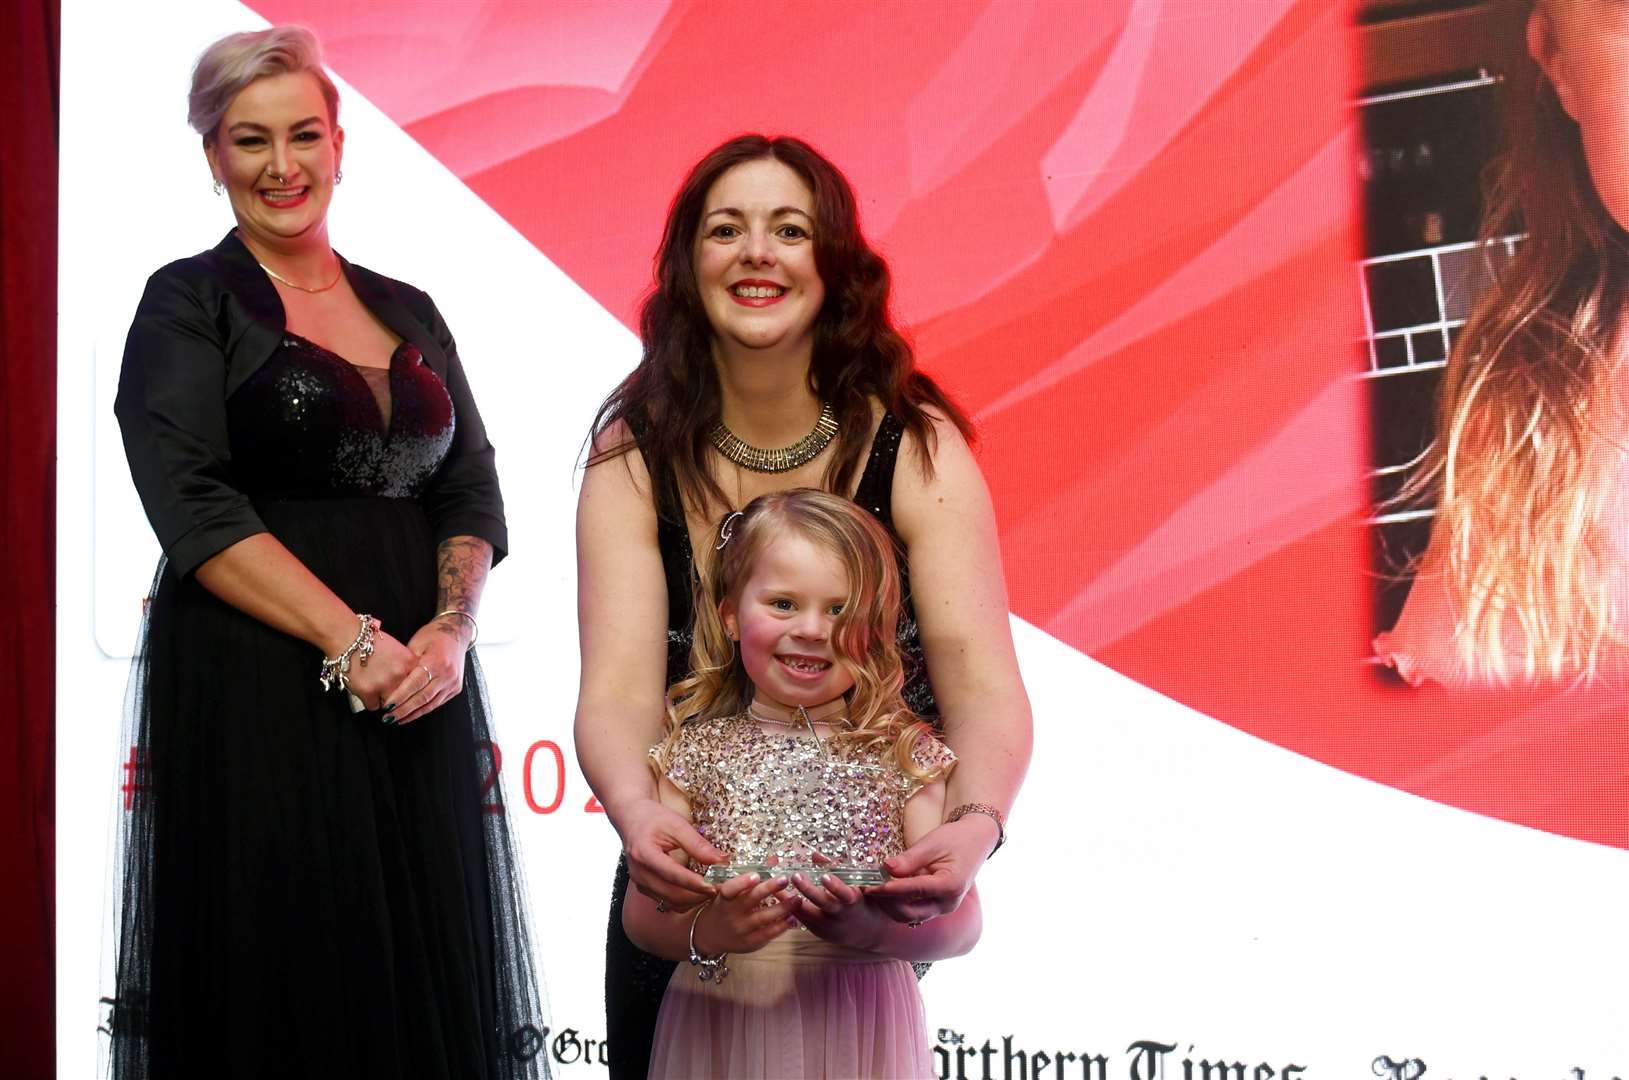 Gracie Andrew won the Brave Child award presented by Katrina Ashbolt of Macleod & MacCallum. Proud mum Katie is also pictured. Picture: James Mackenzie.